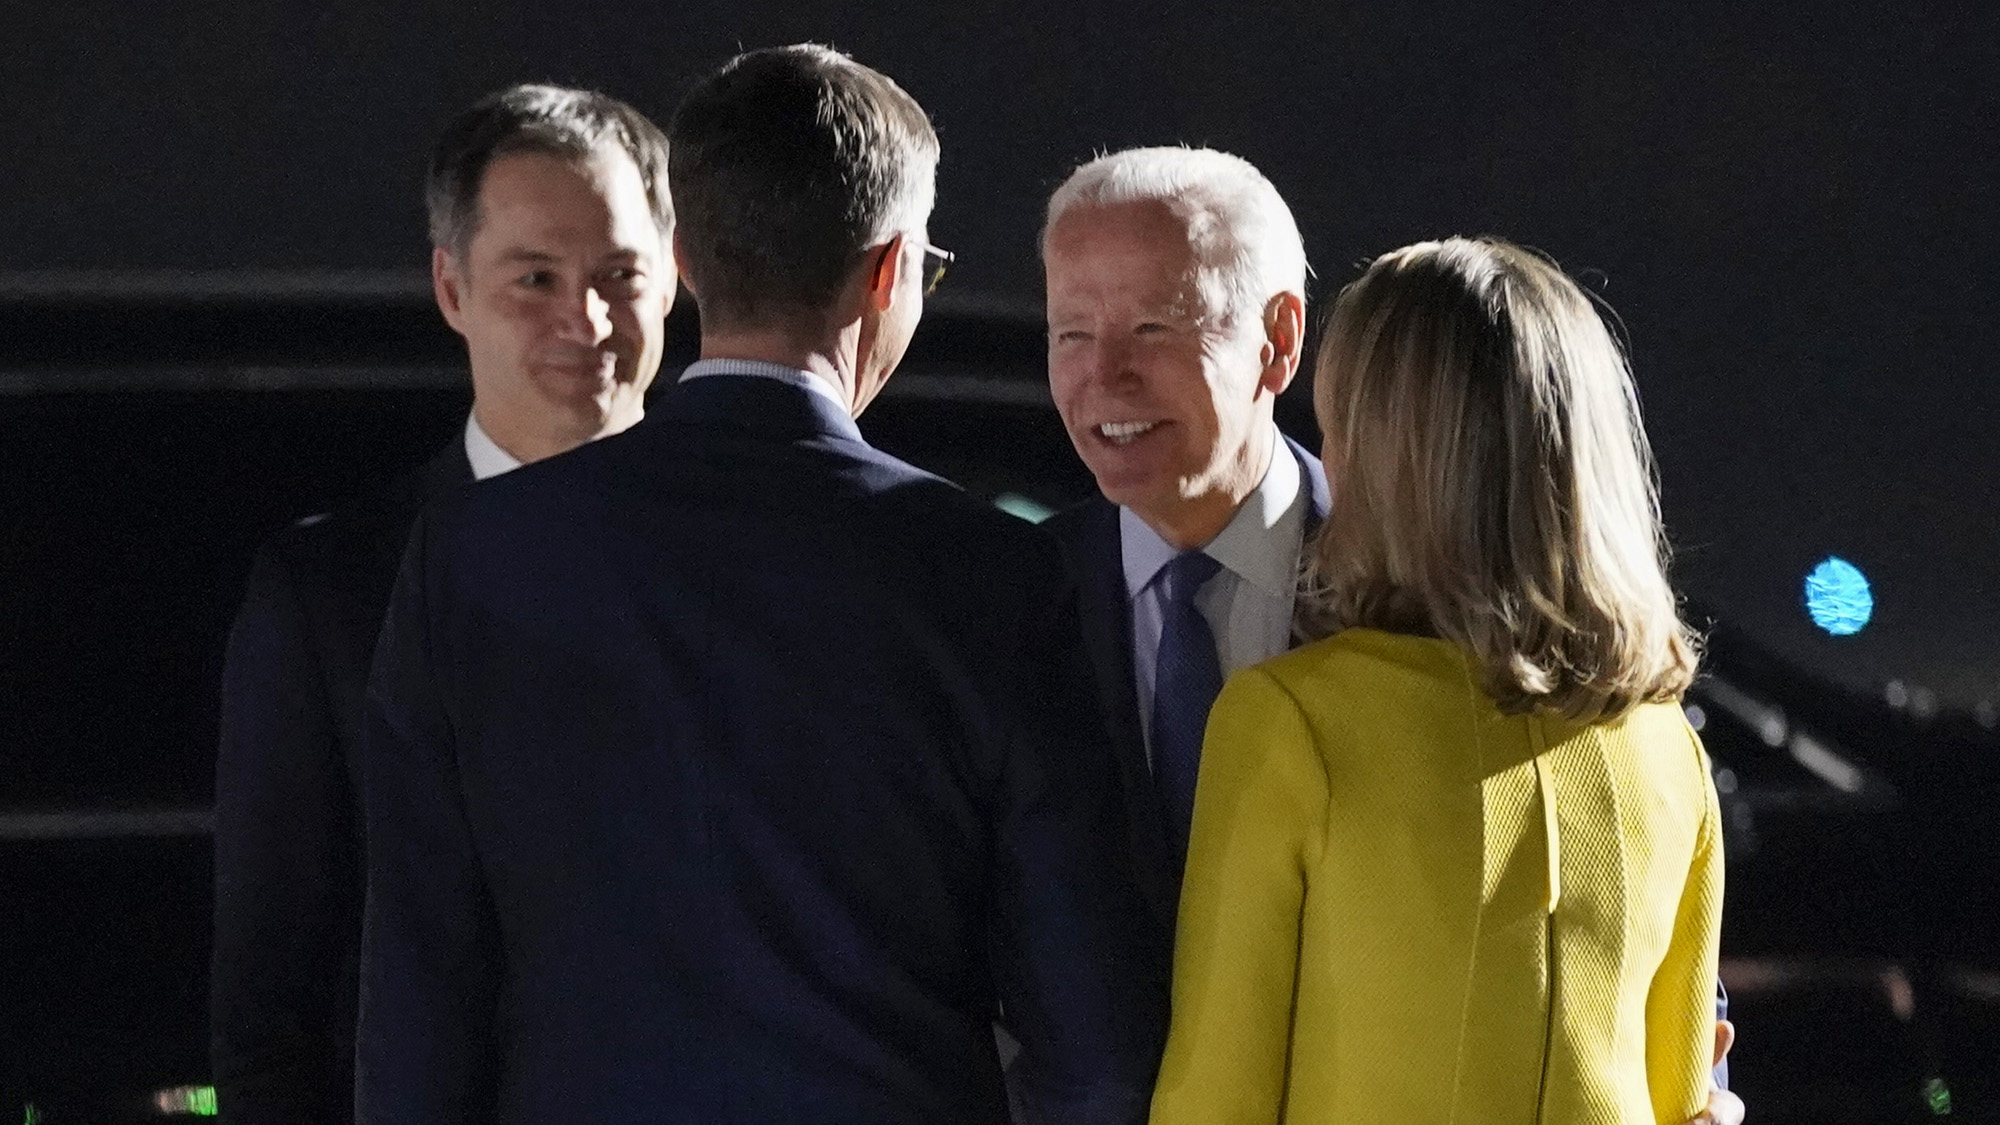 President Joe Biden and Belgian Prime Minister Alexander de Croo, left, speak with others after arriving at Brussels National Airport, Wednesday, March 23.